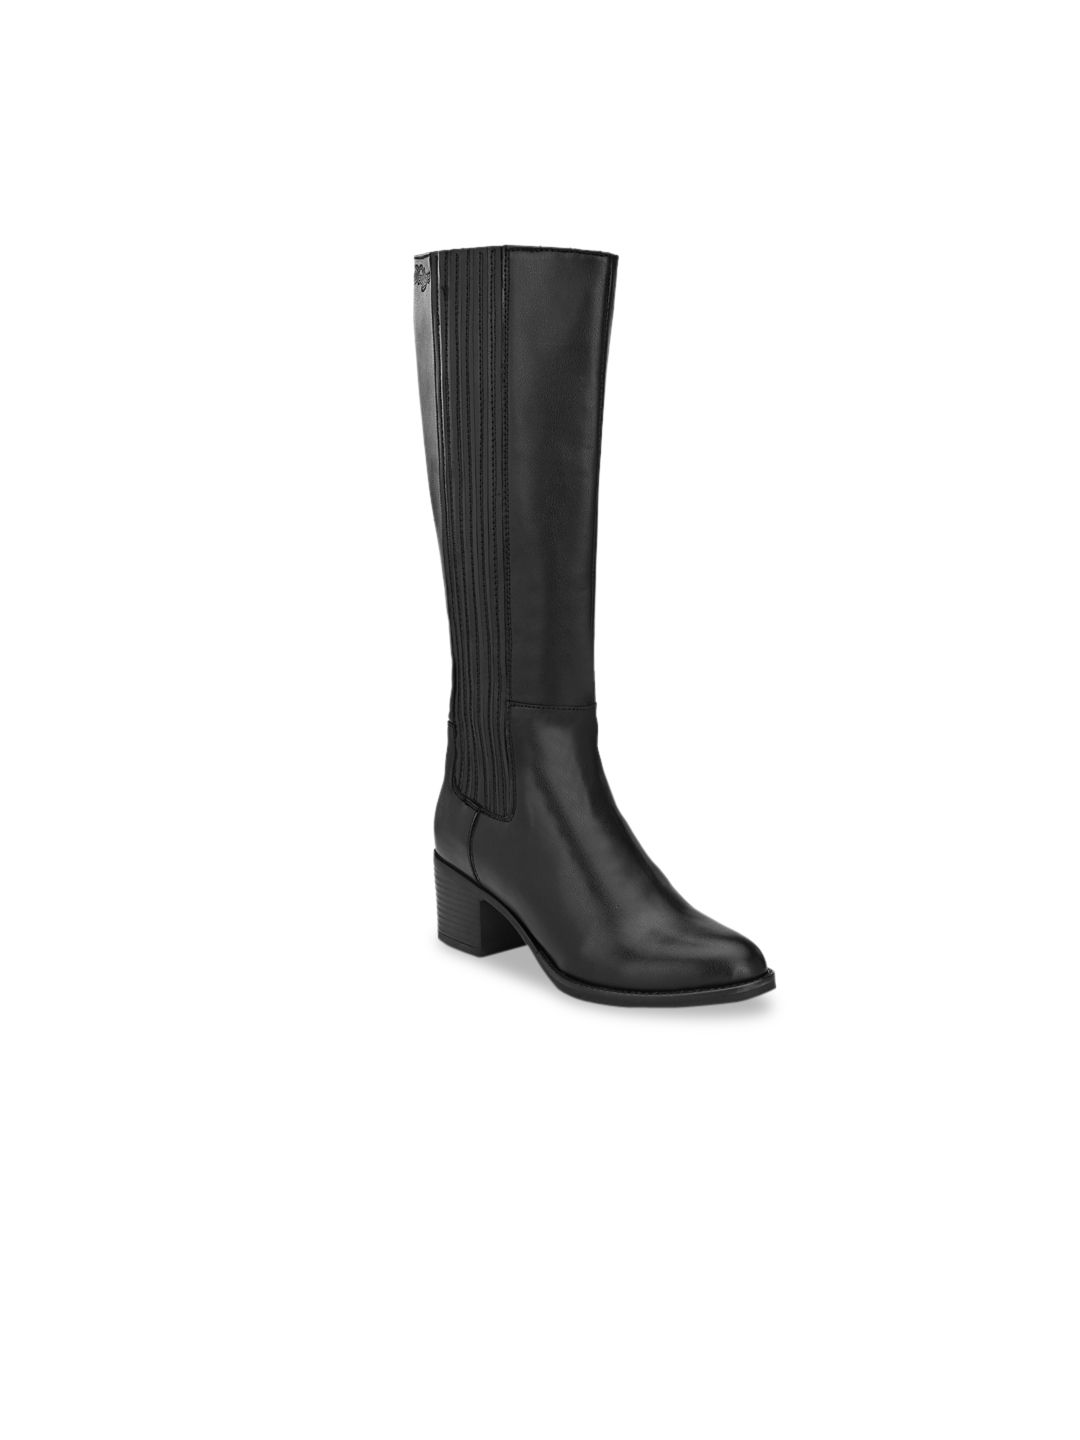 Delize Women Black Block Heeled Boots Price in India